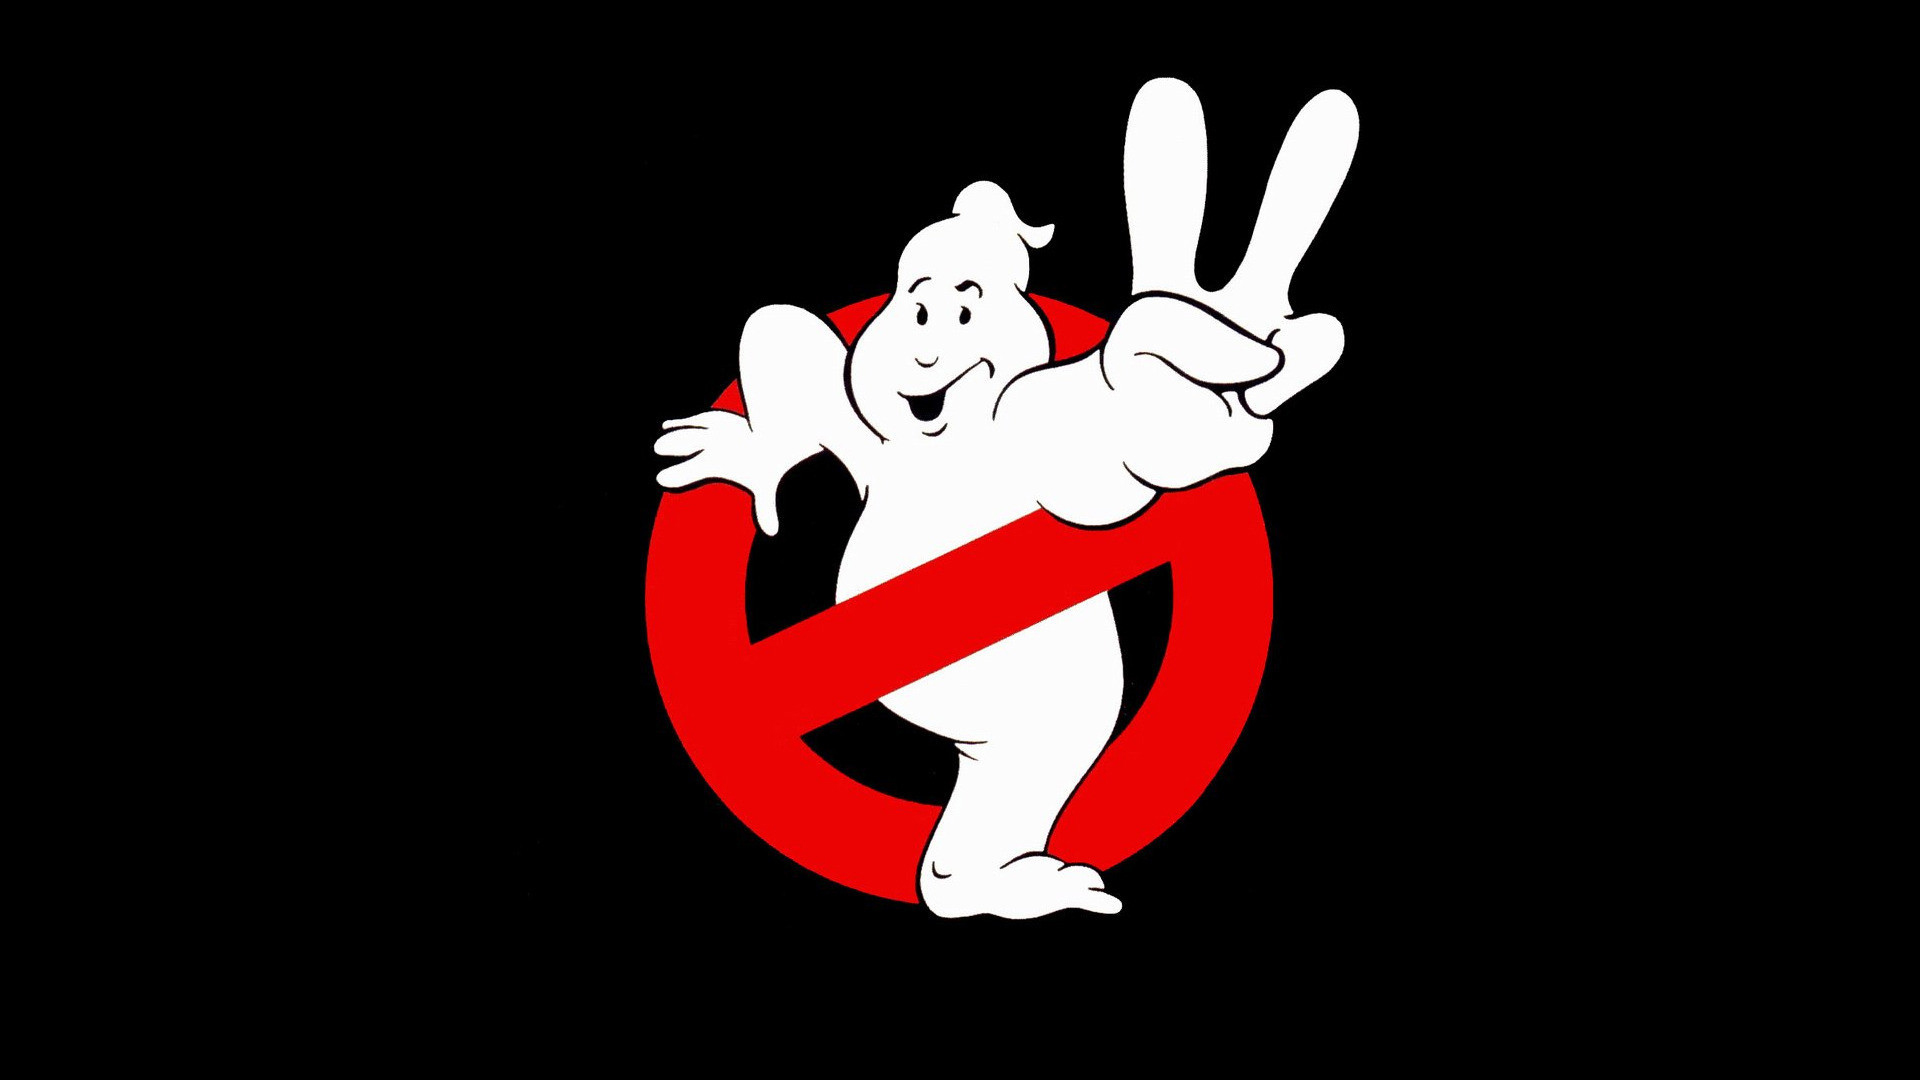 Ghostbusters 3 Wallpapers  Wallpaper Cave